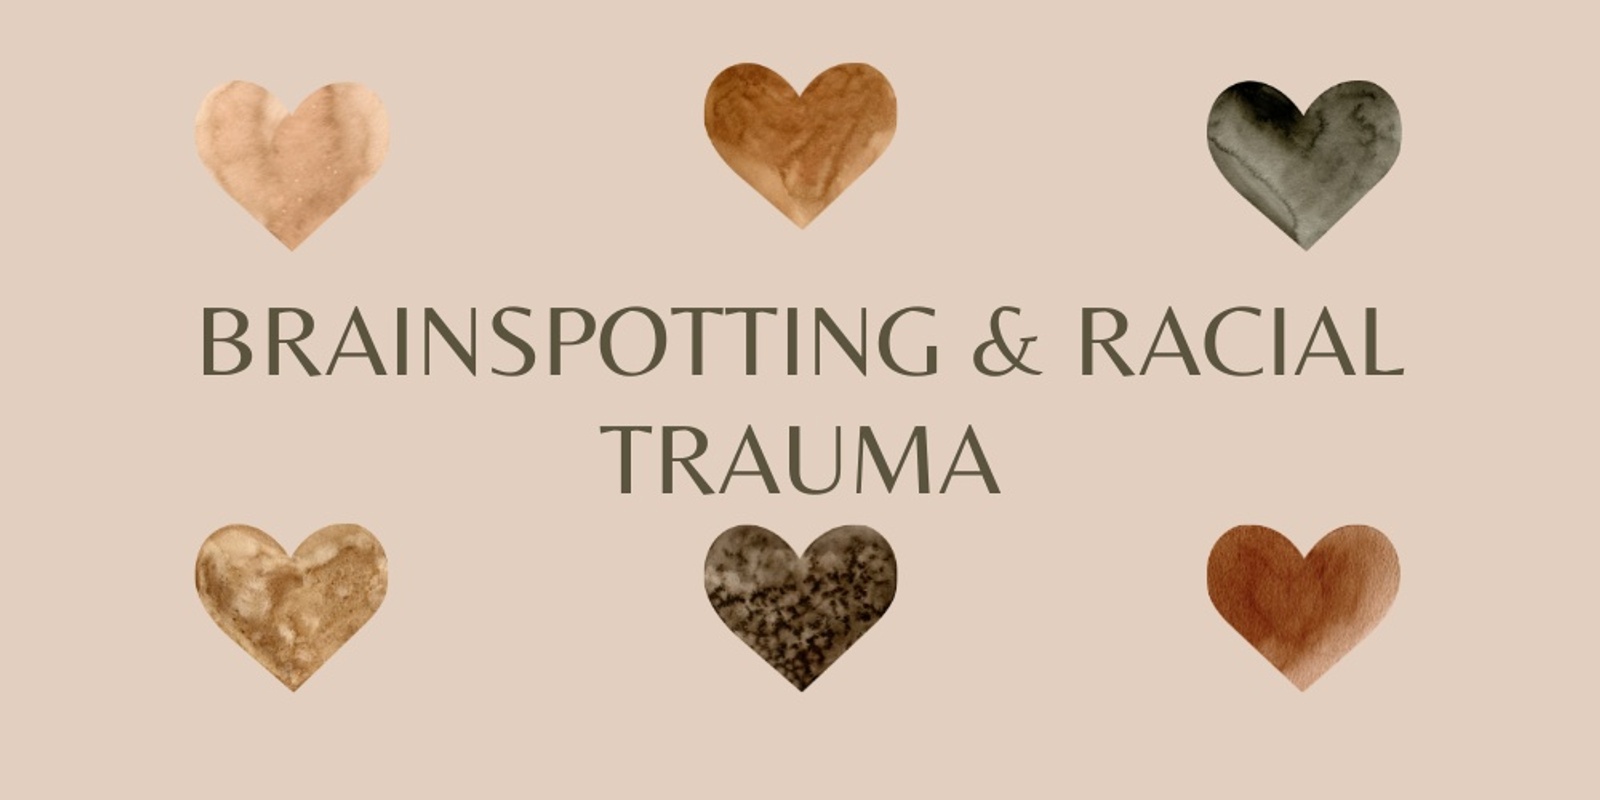 Banner image for Brainspotting and Racial Trauma Intro Workshop 